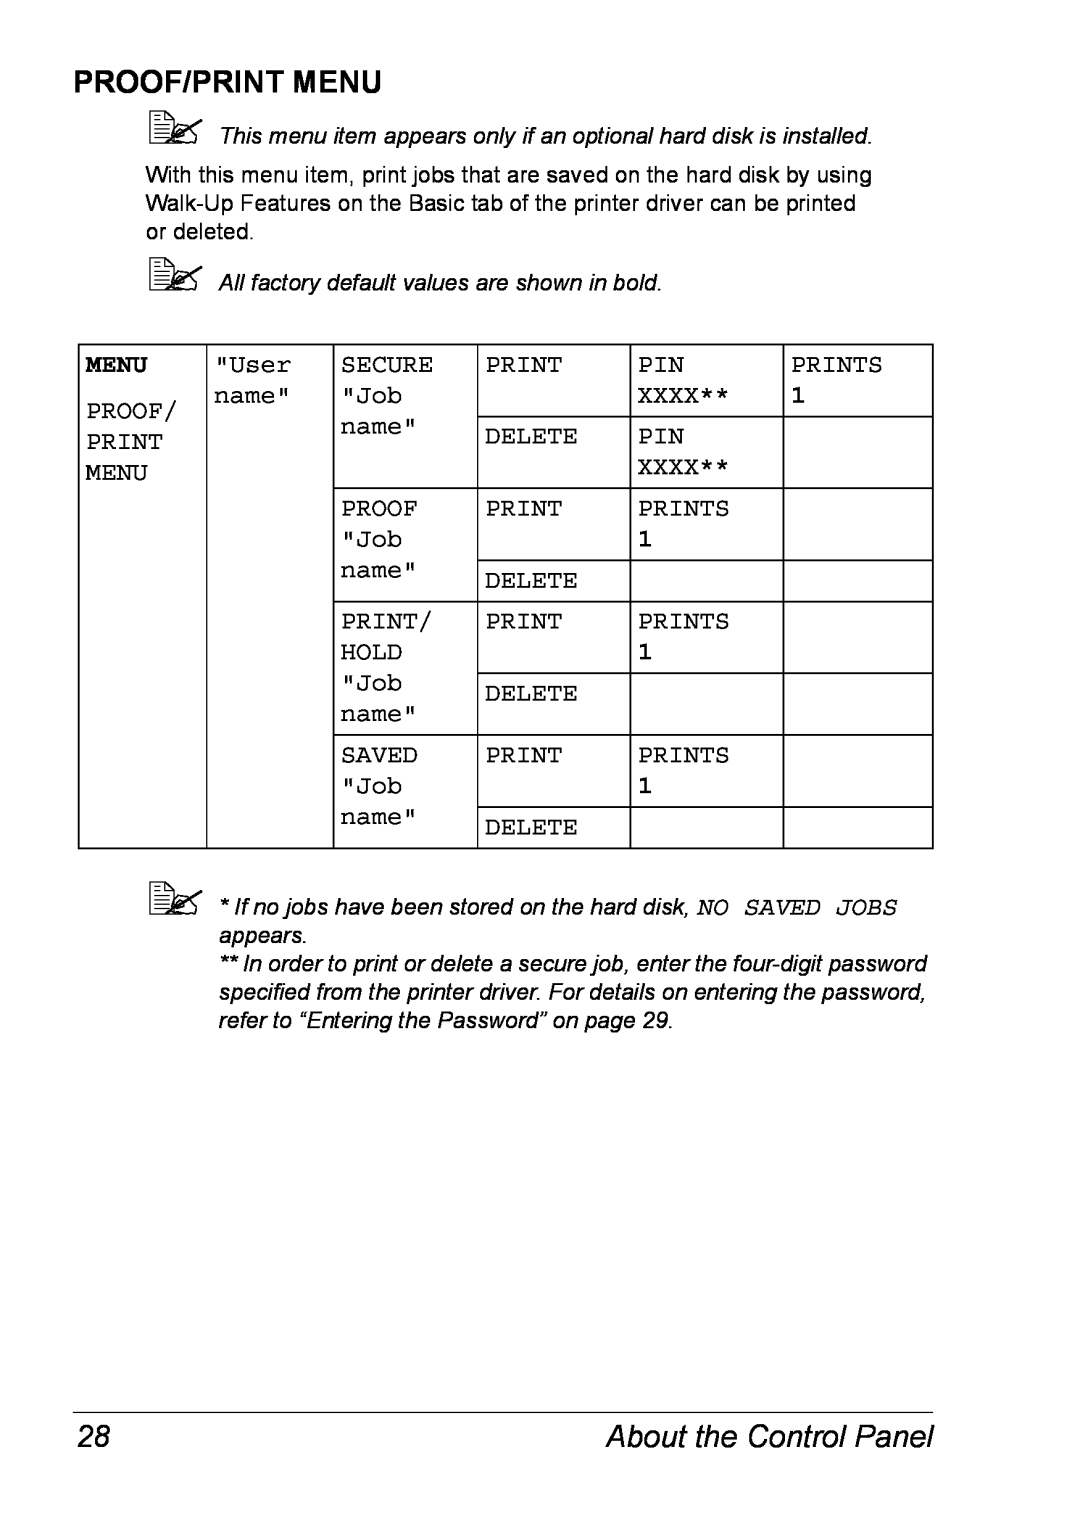 Xerox 6120 manual Proof/Print Menu, About the Control Panel 